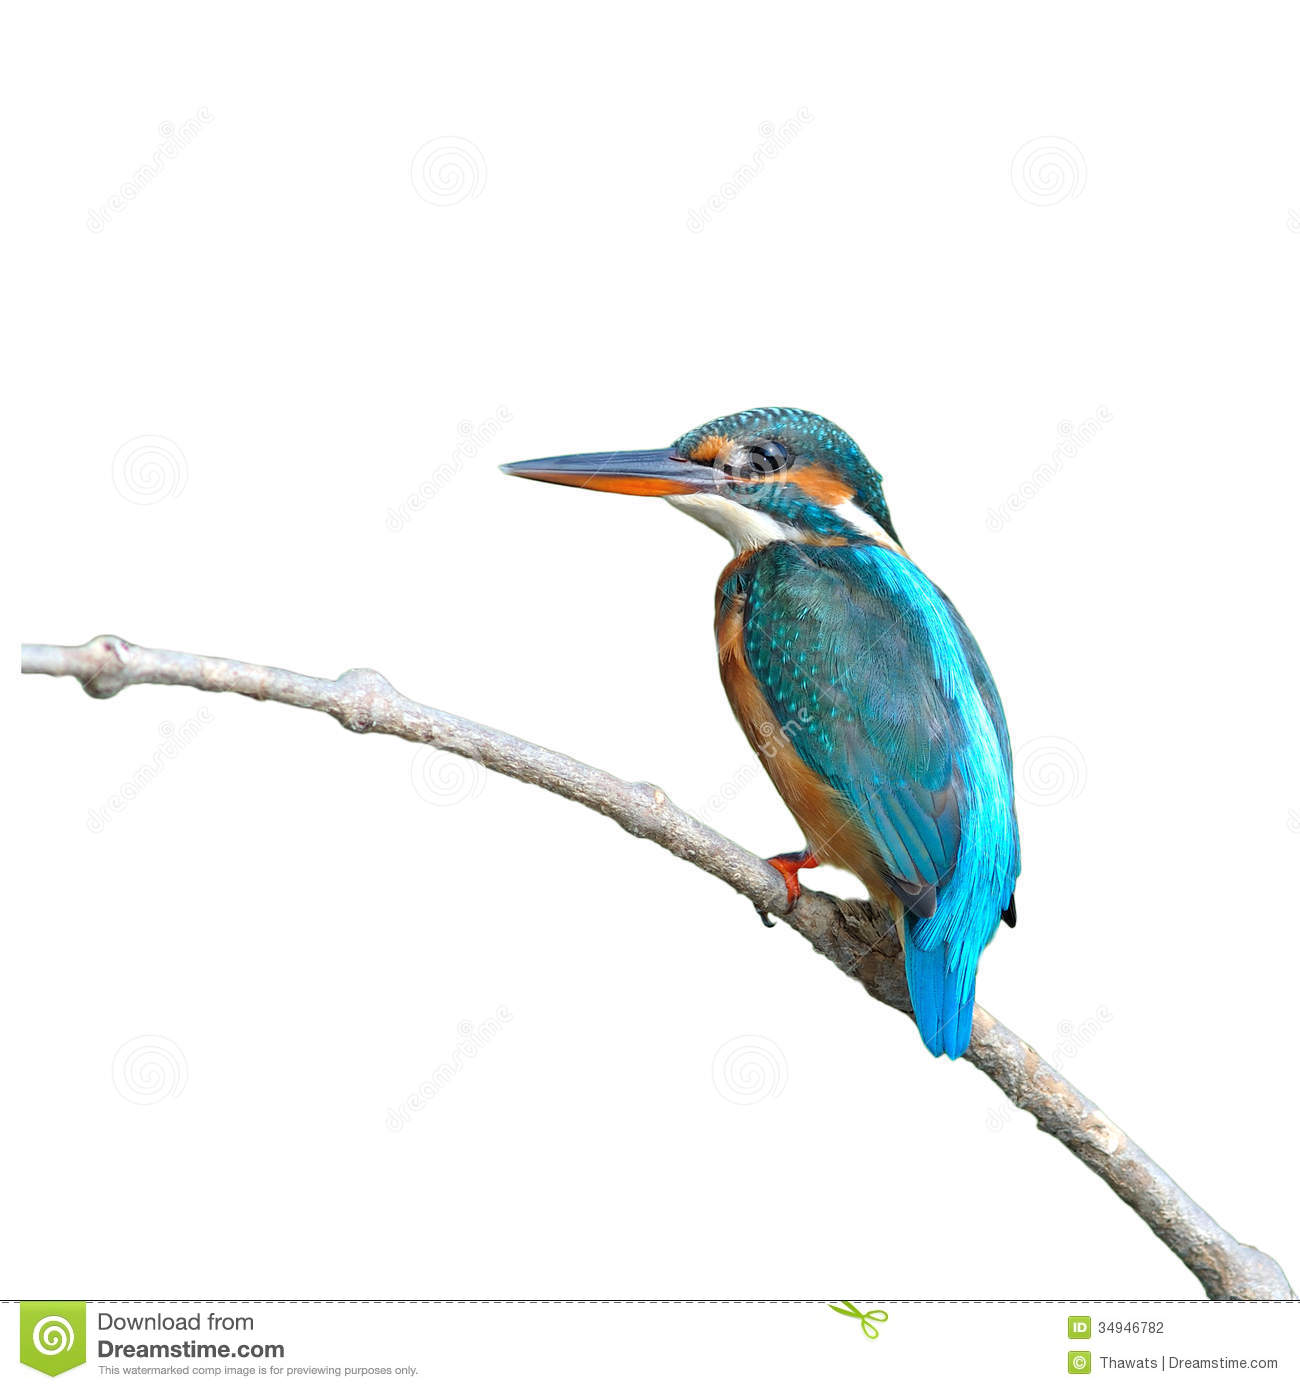 Common Kingfisher clipart #18, Download drawings